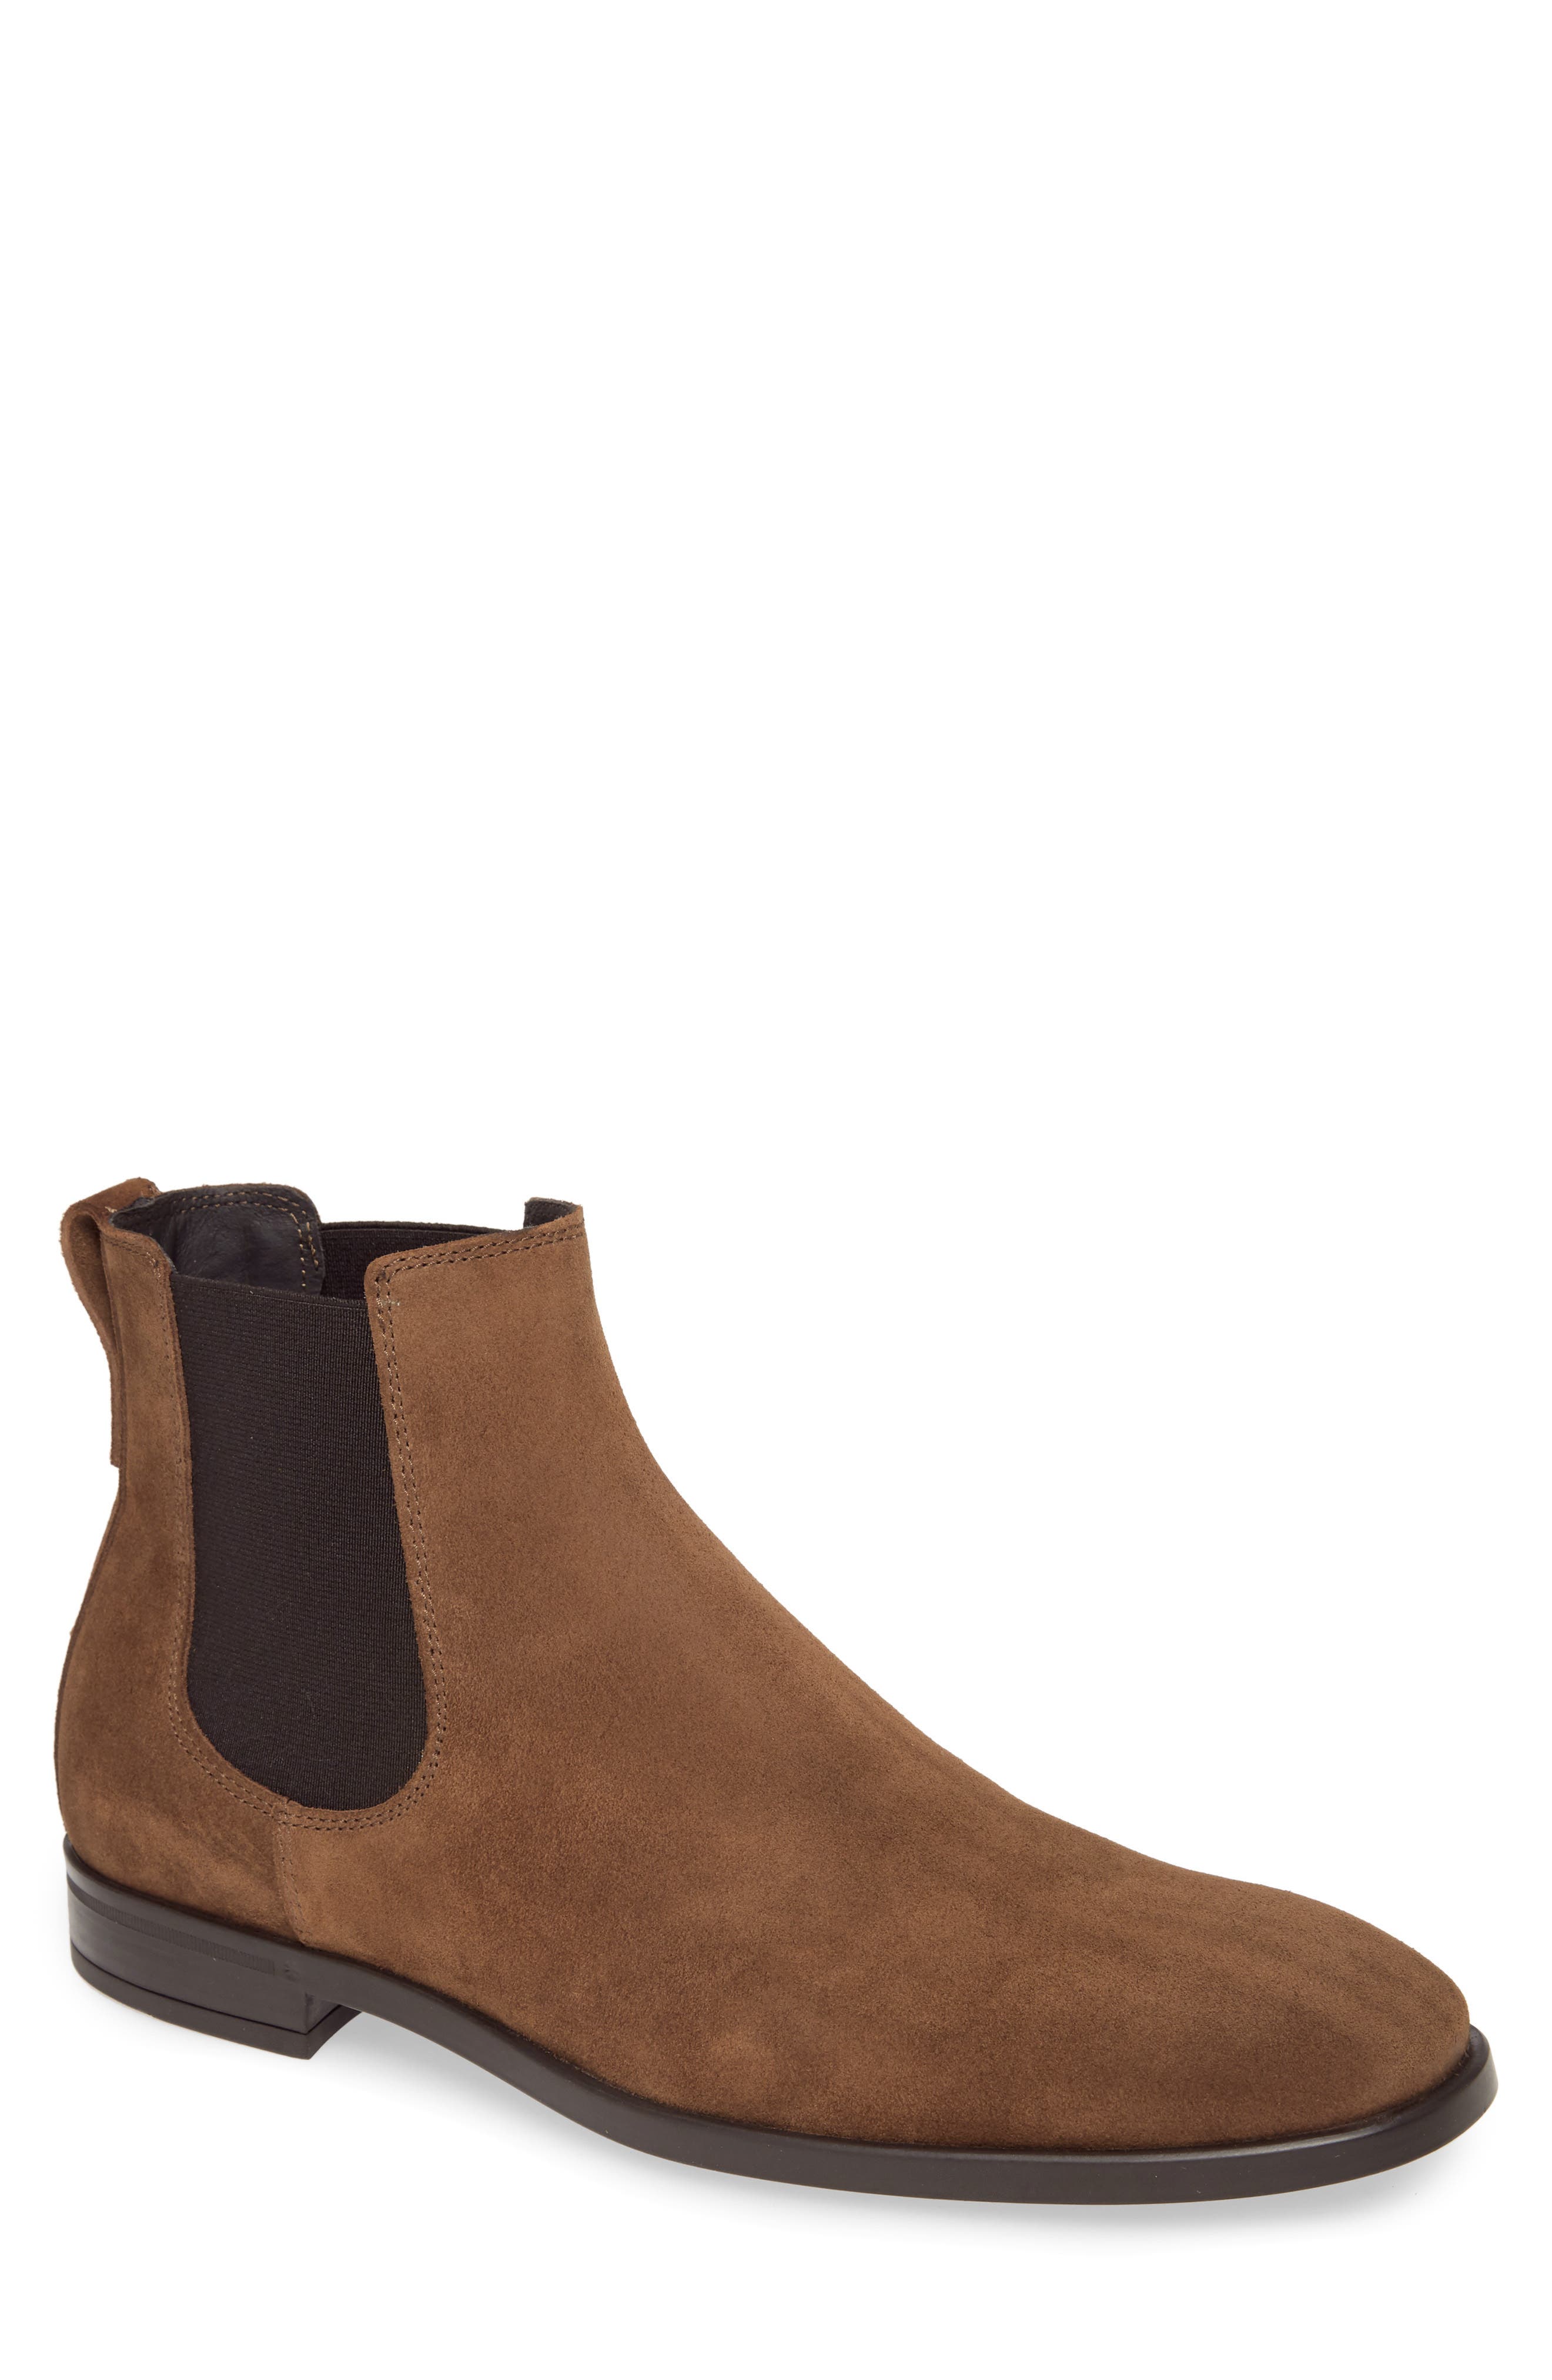 Men's To Boot New York Shoes | Nordstrom